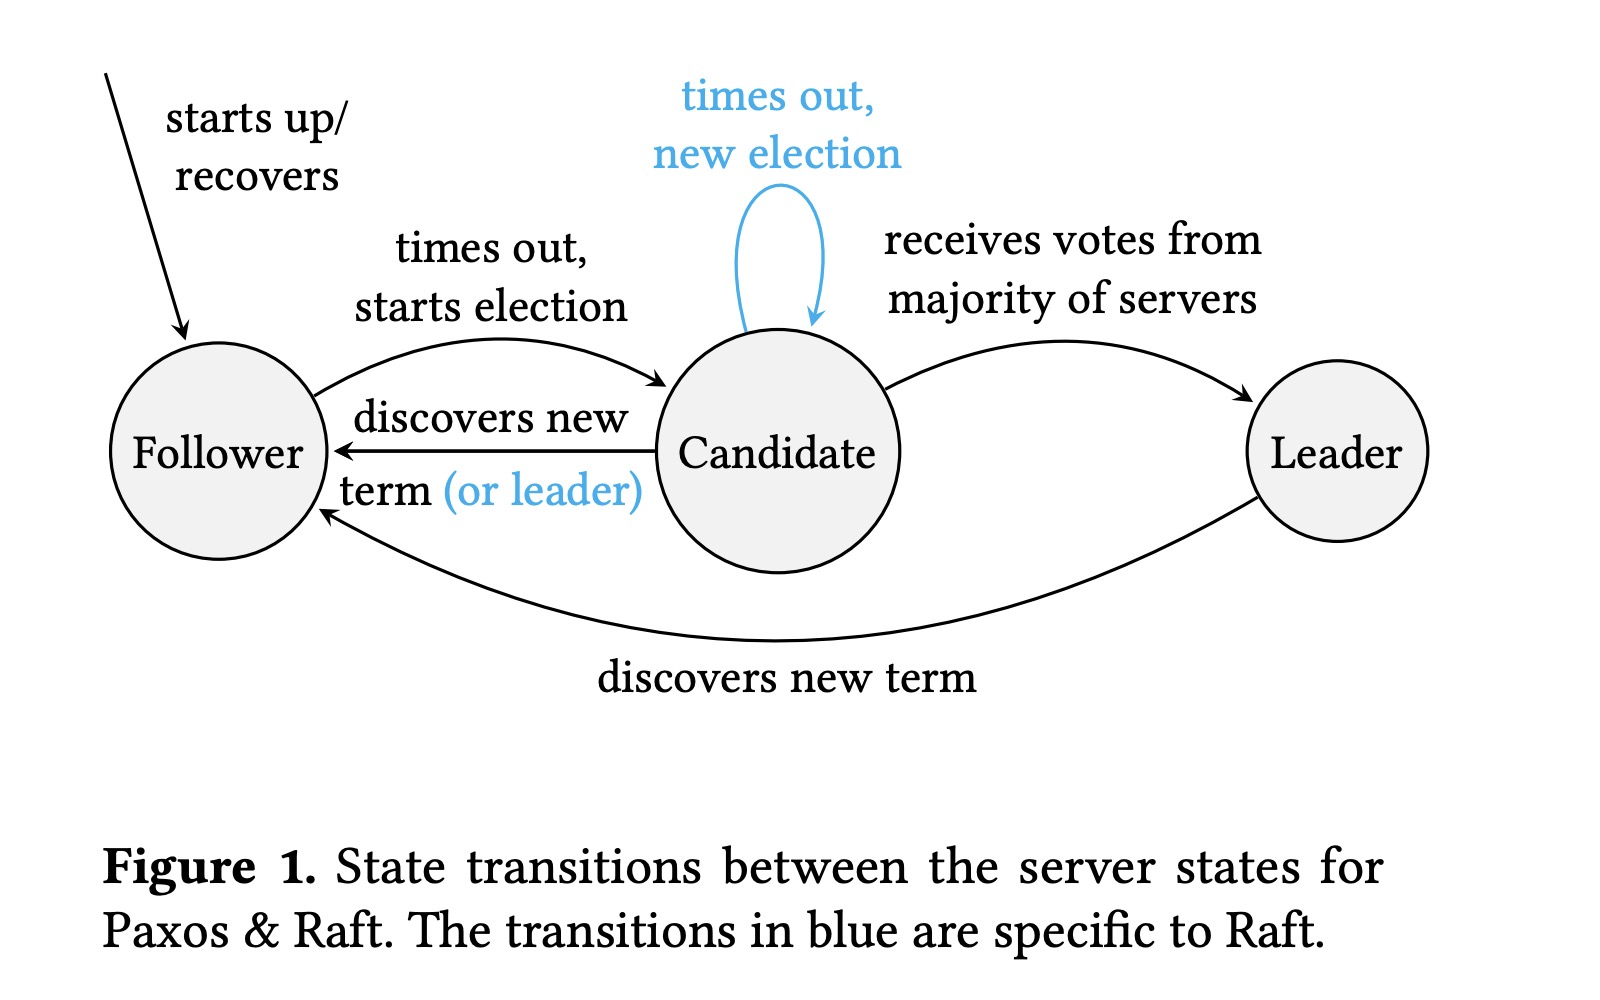 State transitions between the server states for Paxos & Raft